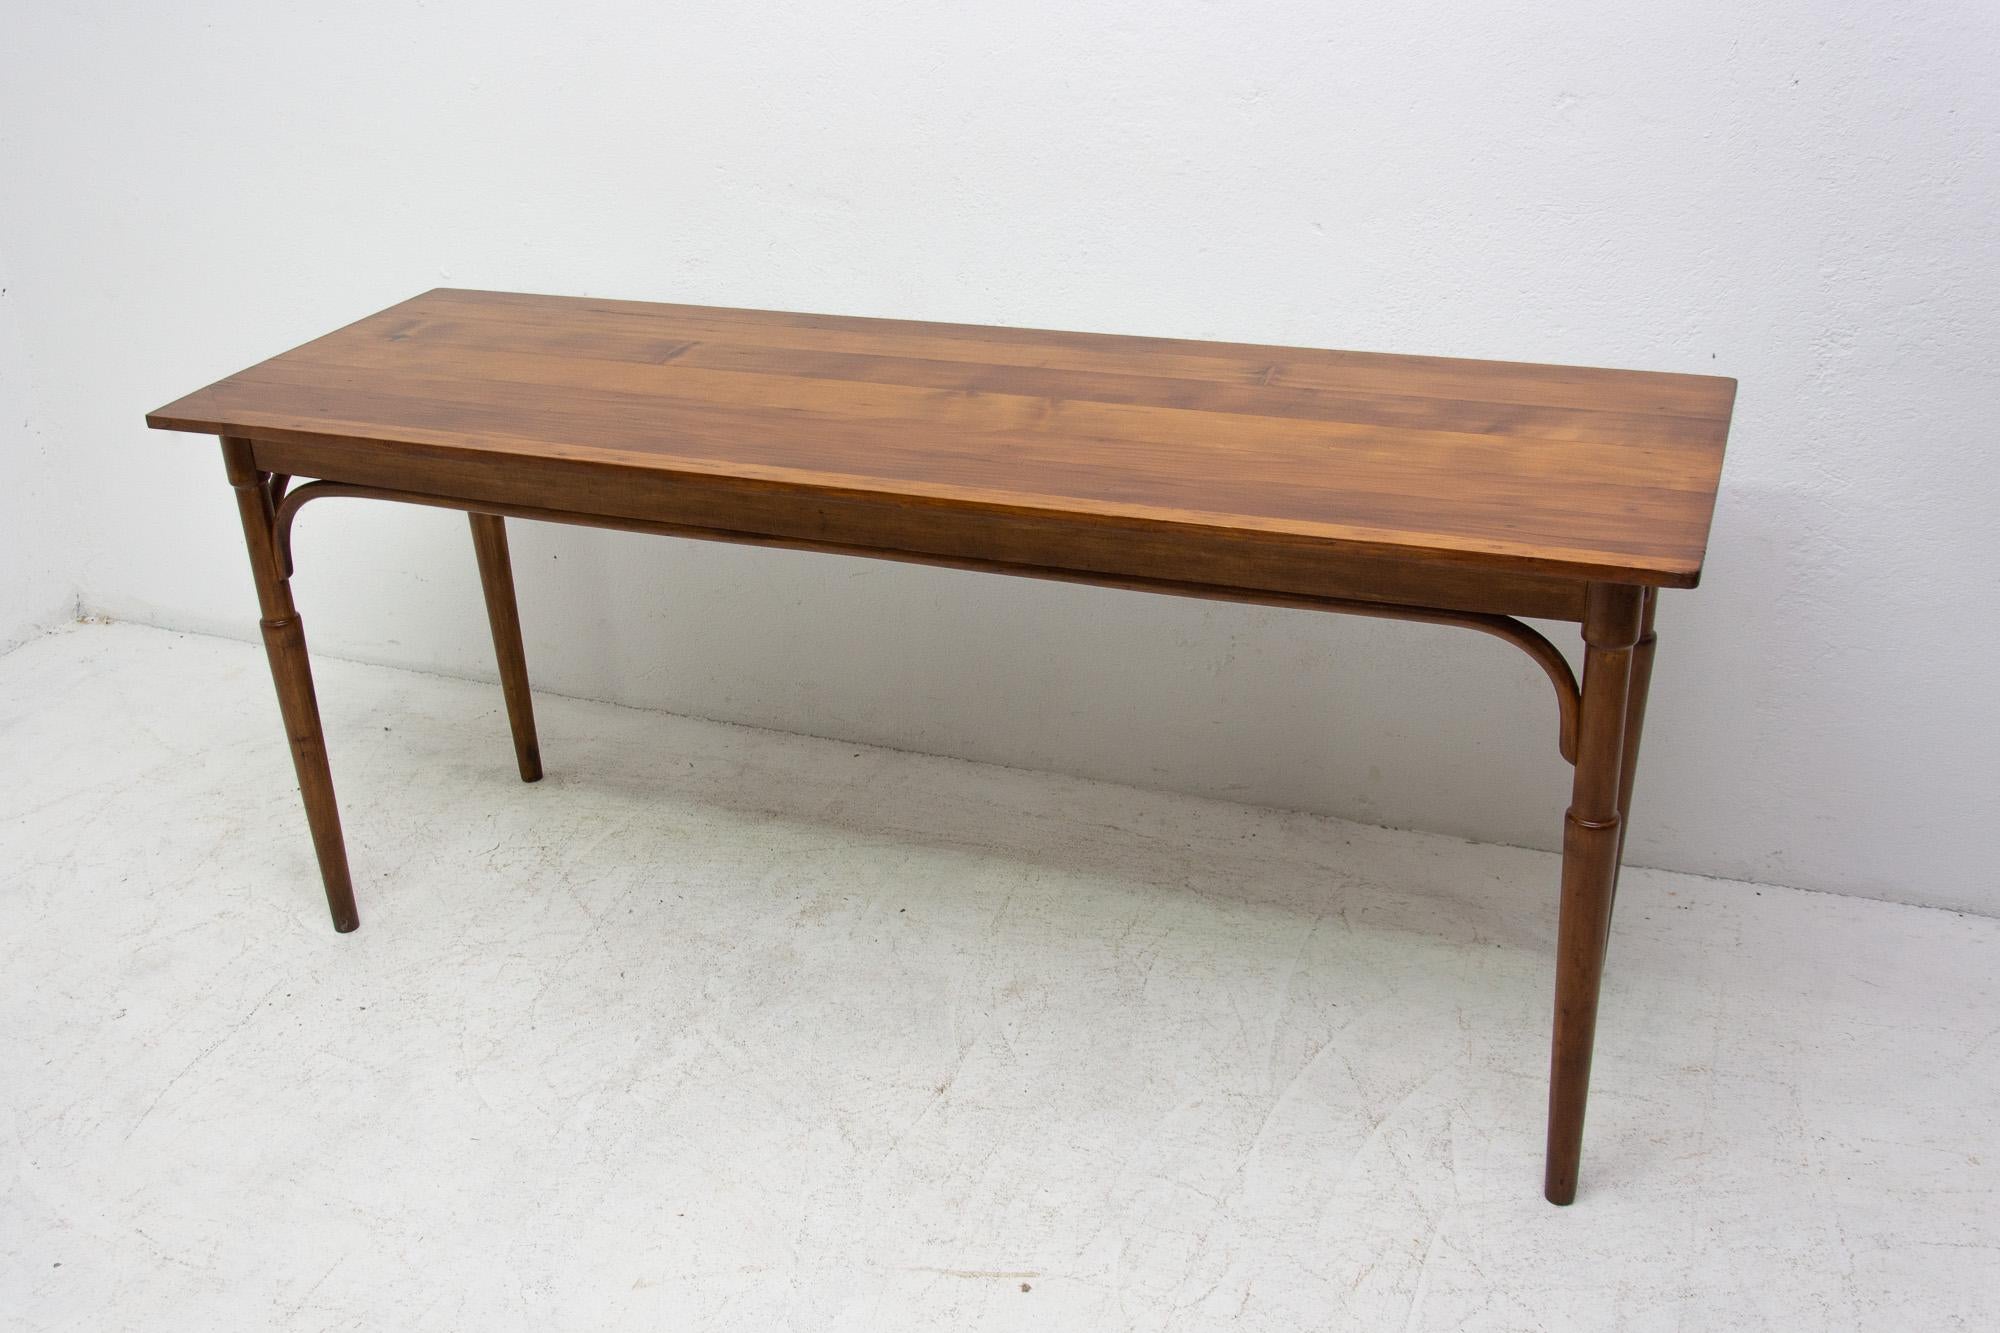 Czech Long Occasional Coffee Table in the Thonet Style, 1920s, Bohemia